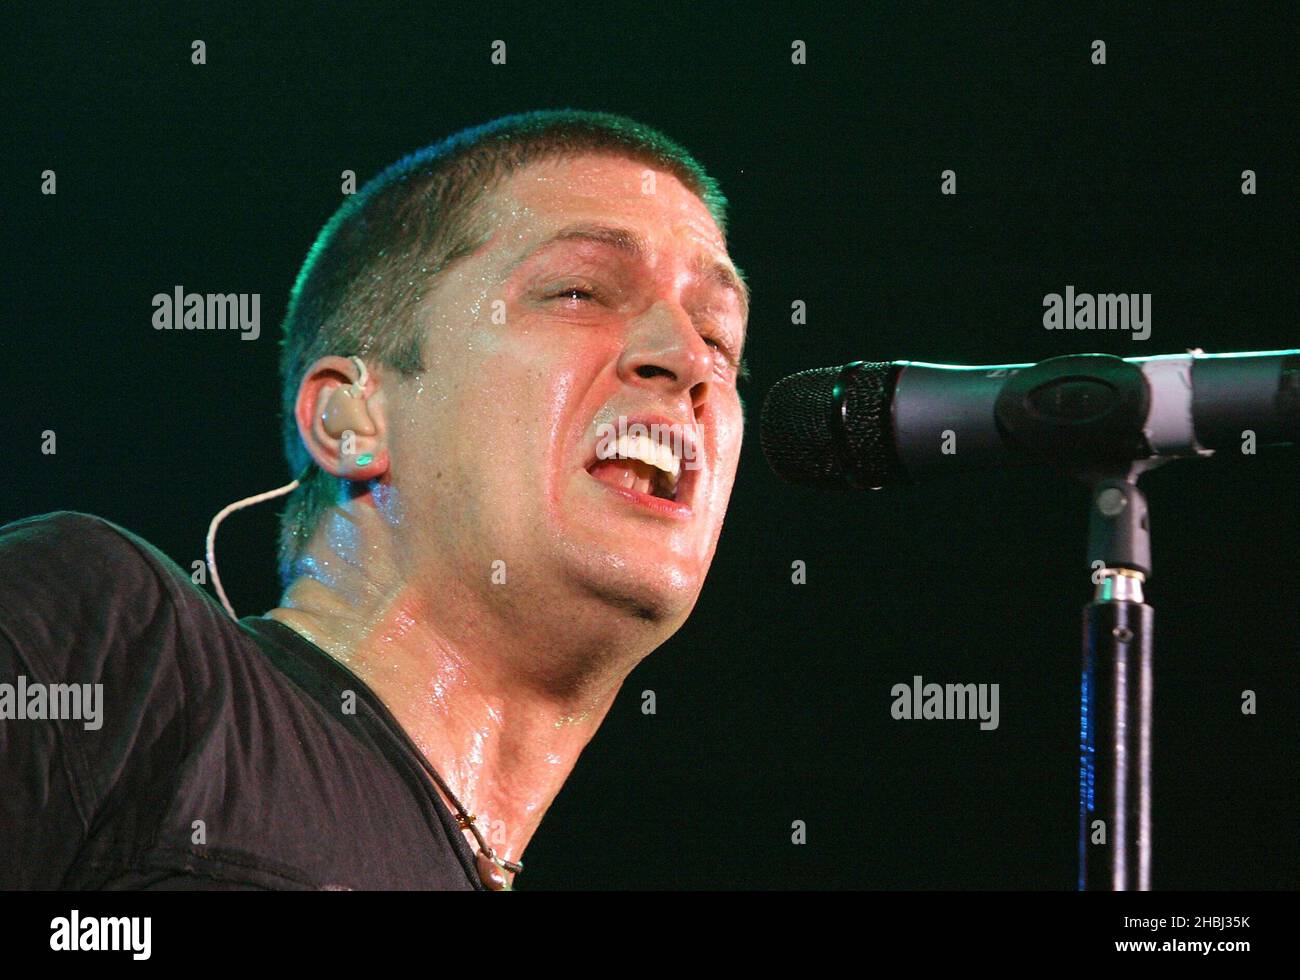 Rob Thomas ex Matchbox 20; performs on stage at The Astoria on June 22, 2005 in London. Stock Photo